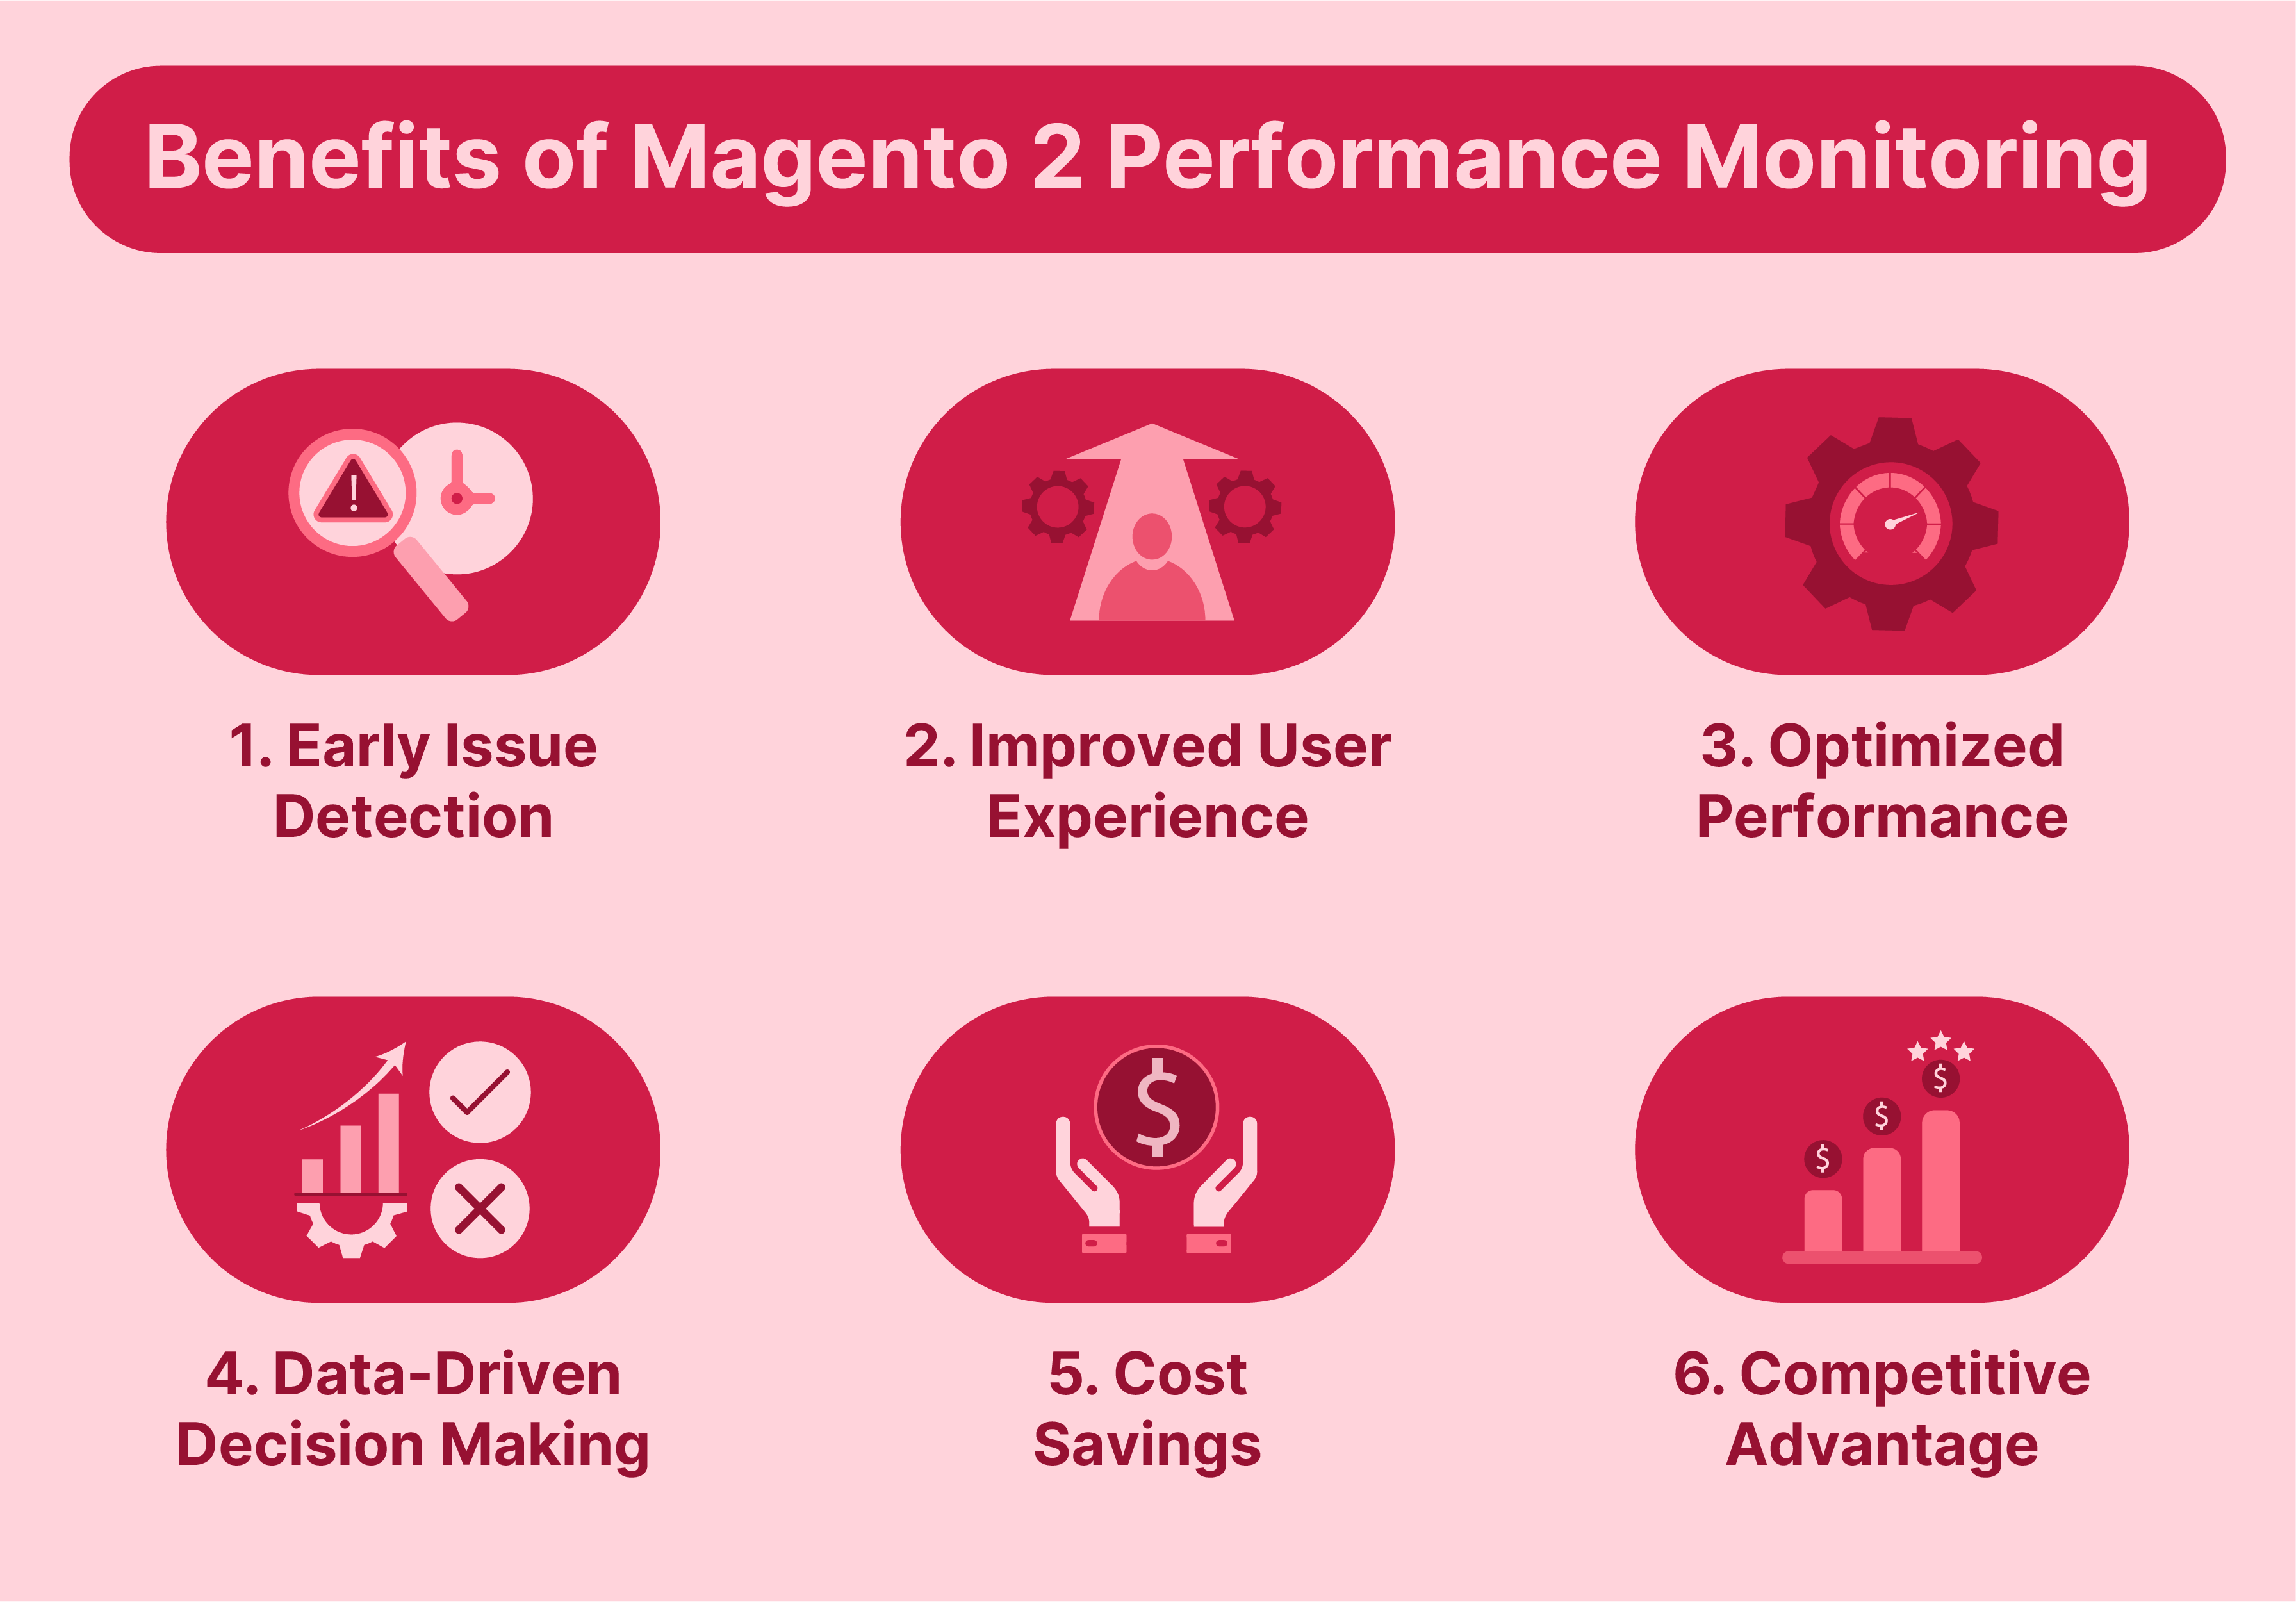 Benefits of Performance Monitoring in Magento 2